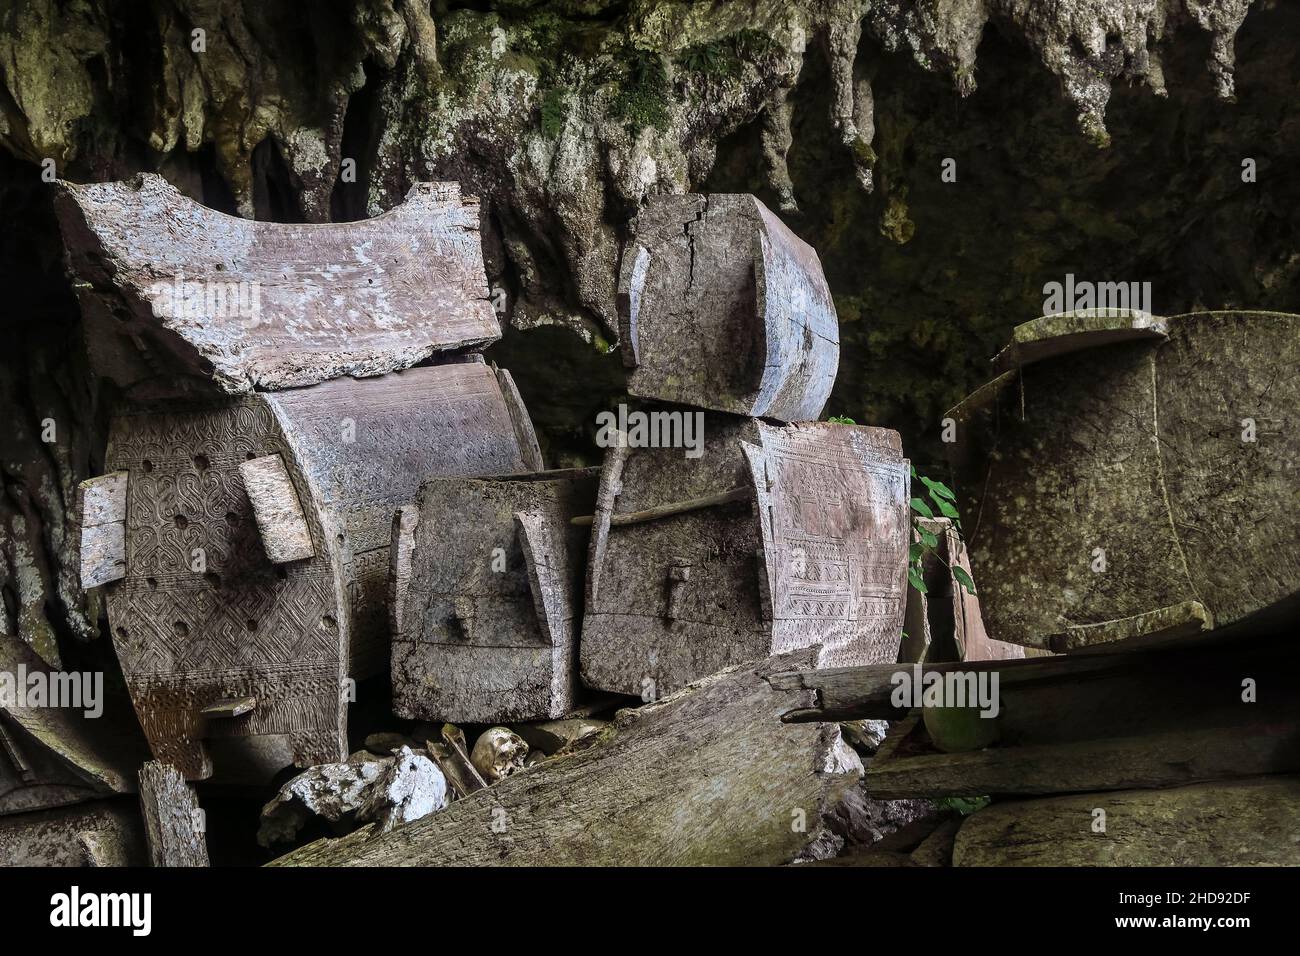 Weathered coffins (erong) in the 700 yr old burial cave at Lombock Parinding, north of Rantepao. Lombok Parinding, Toraja, South Sulawesi, Indonesia. Stock Photo